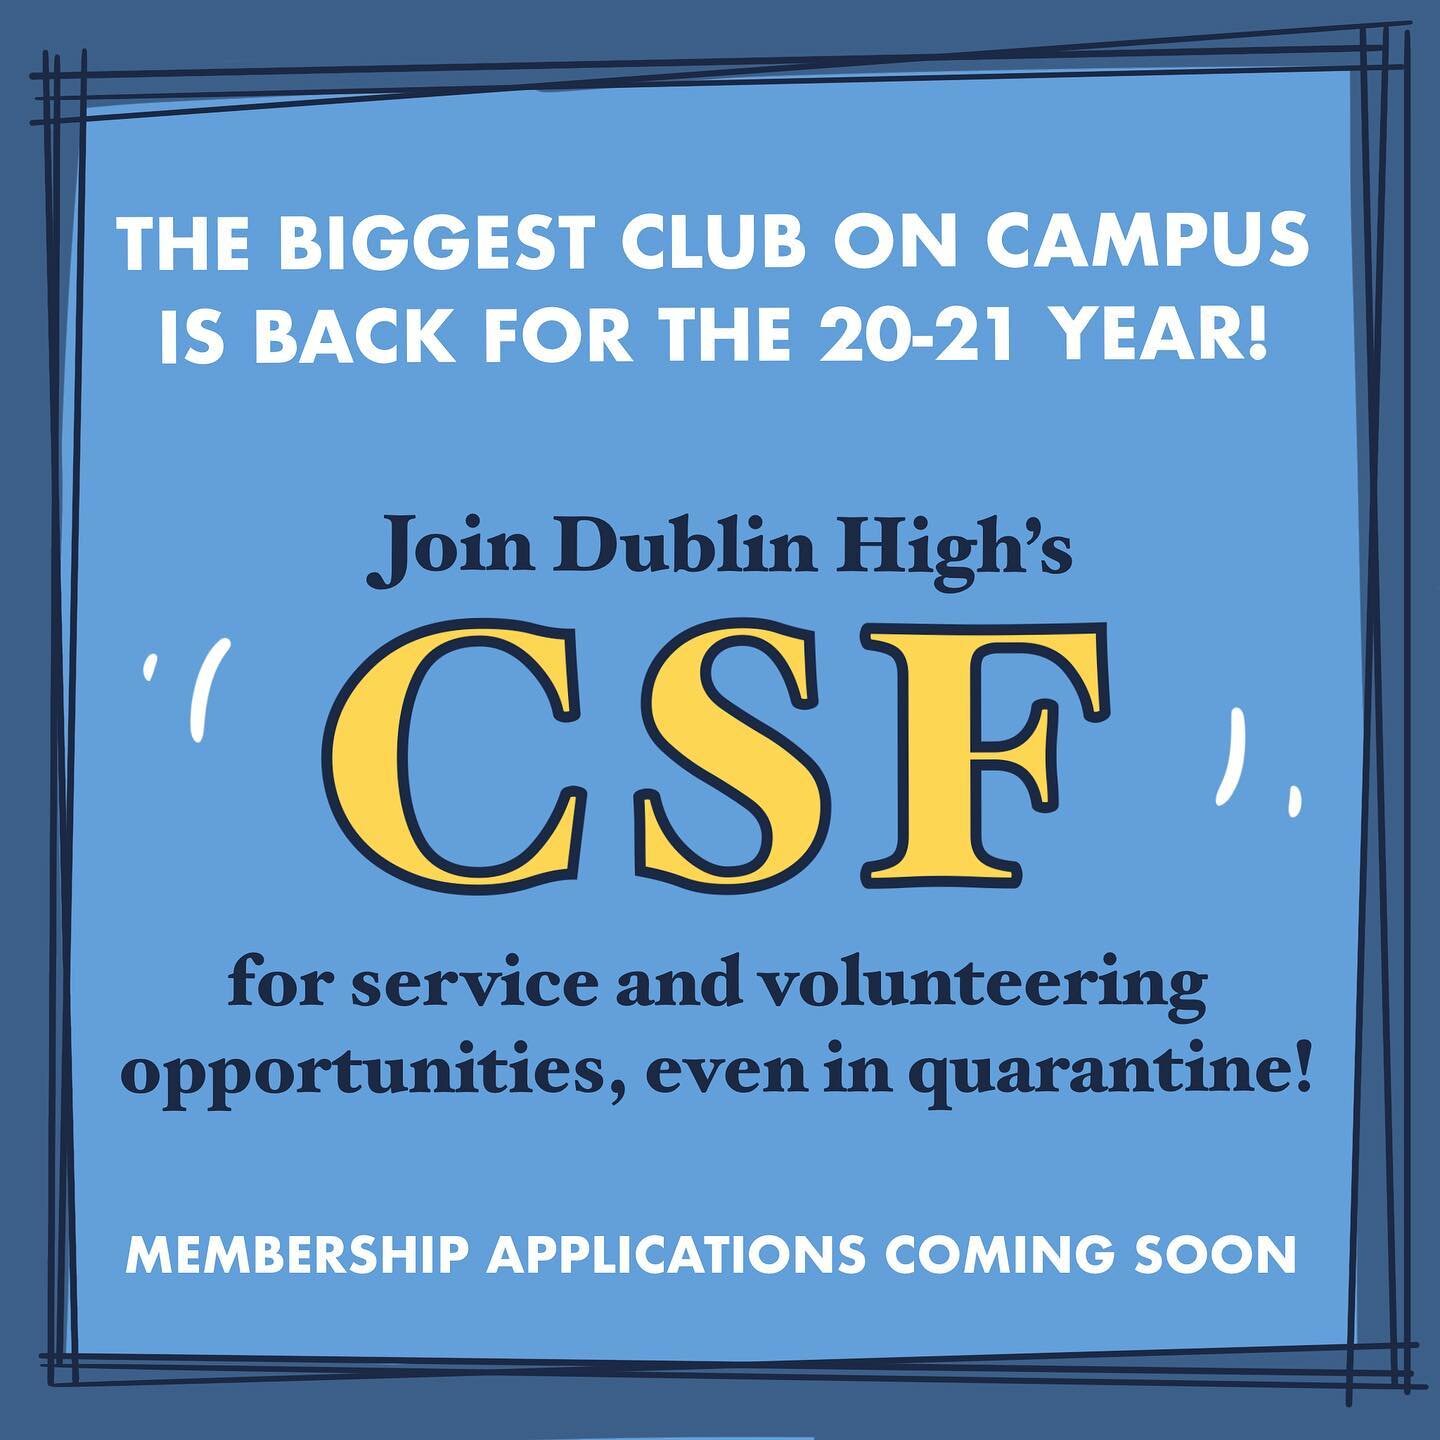 Dublin High&rsquo;s California Scholarship Federation is kicking off for the new school year &mdash; join us for community service and volunteering opportunities adapted to quarantine! 

Membership applications will be announced soon, with requiremen